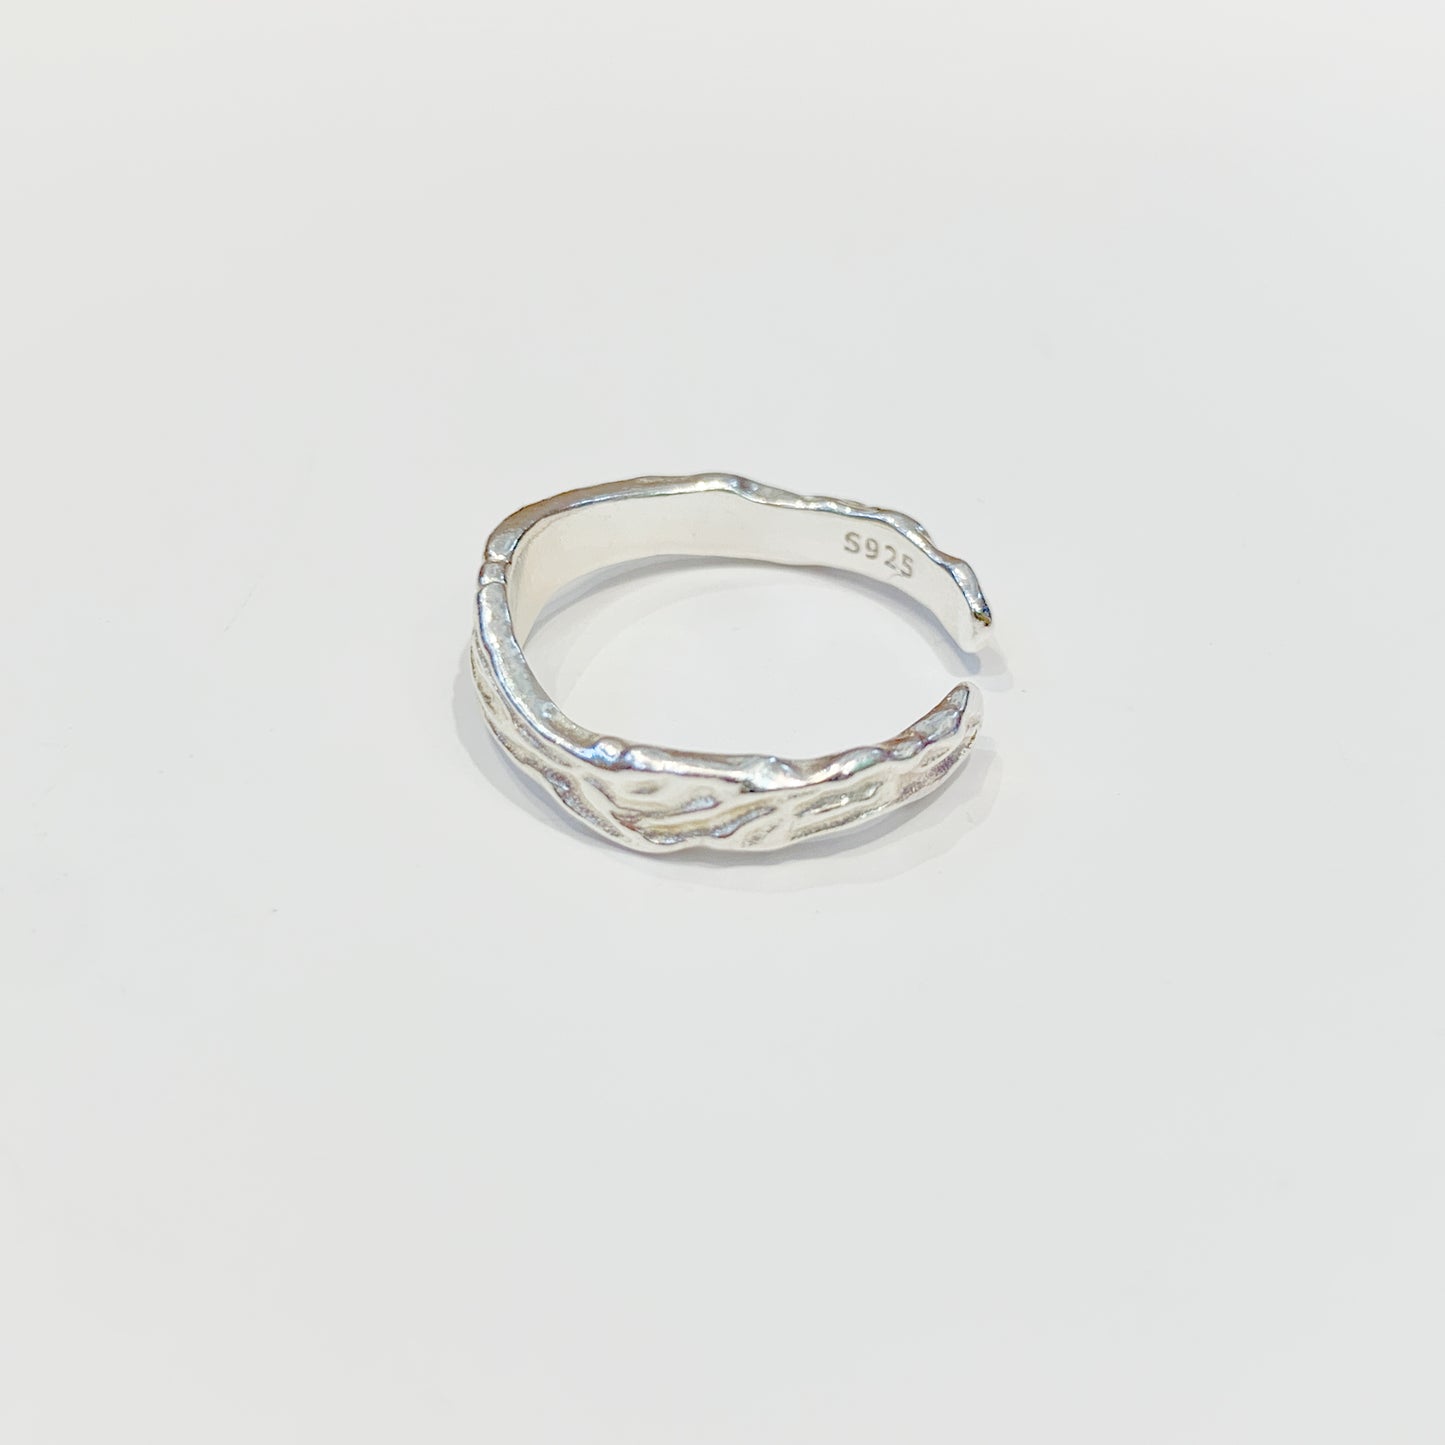 Silver artistic adjustable ring